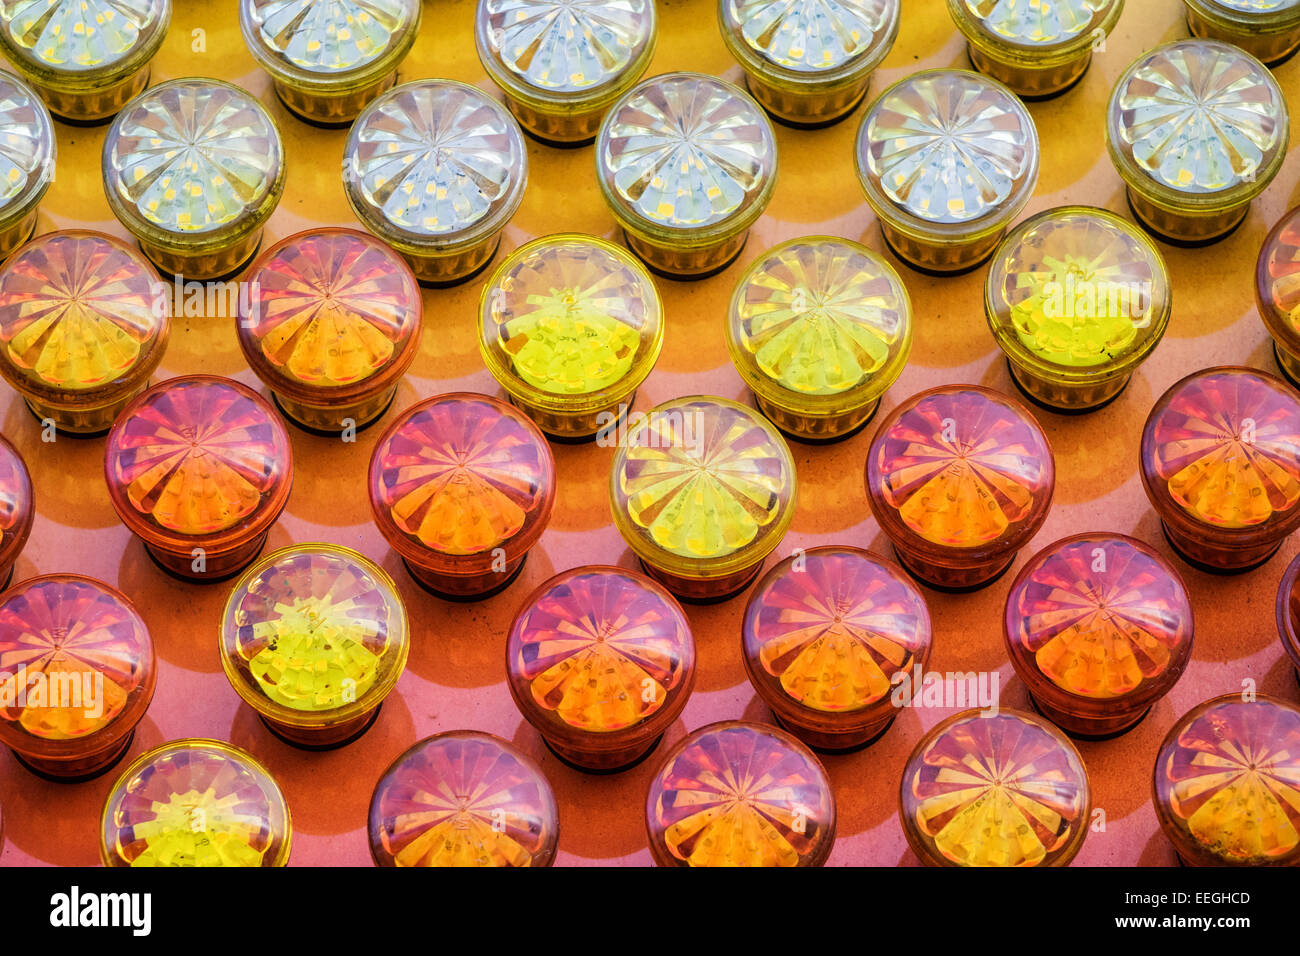 Lamps on a funfair. Stock Photo